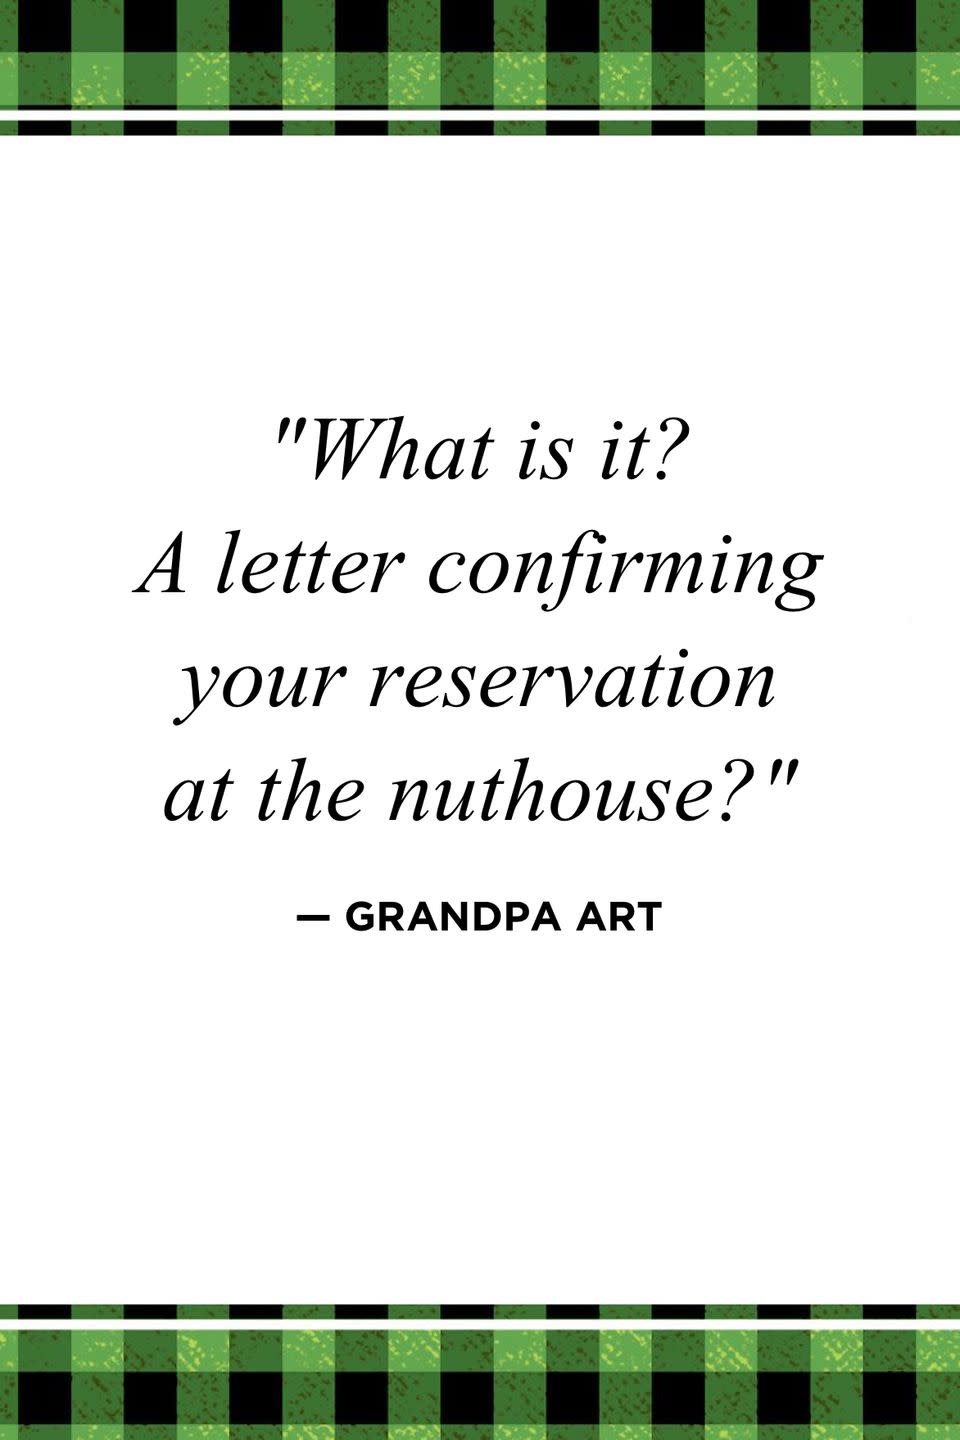 <p>"What is it? A letter confirming your reservation at the nuthouse?"</p>